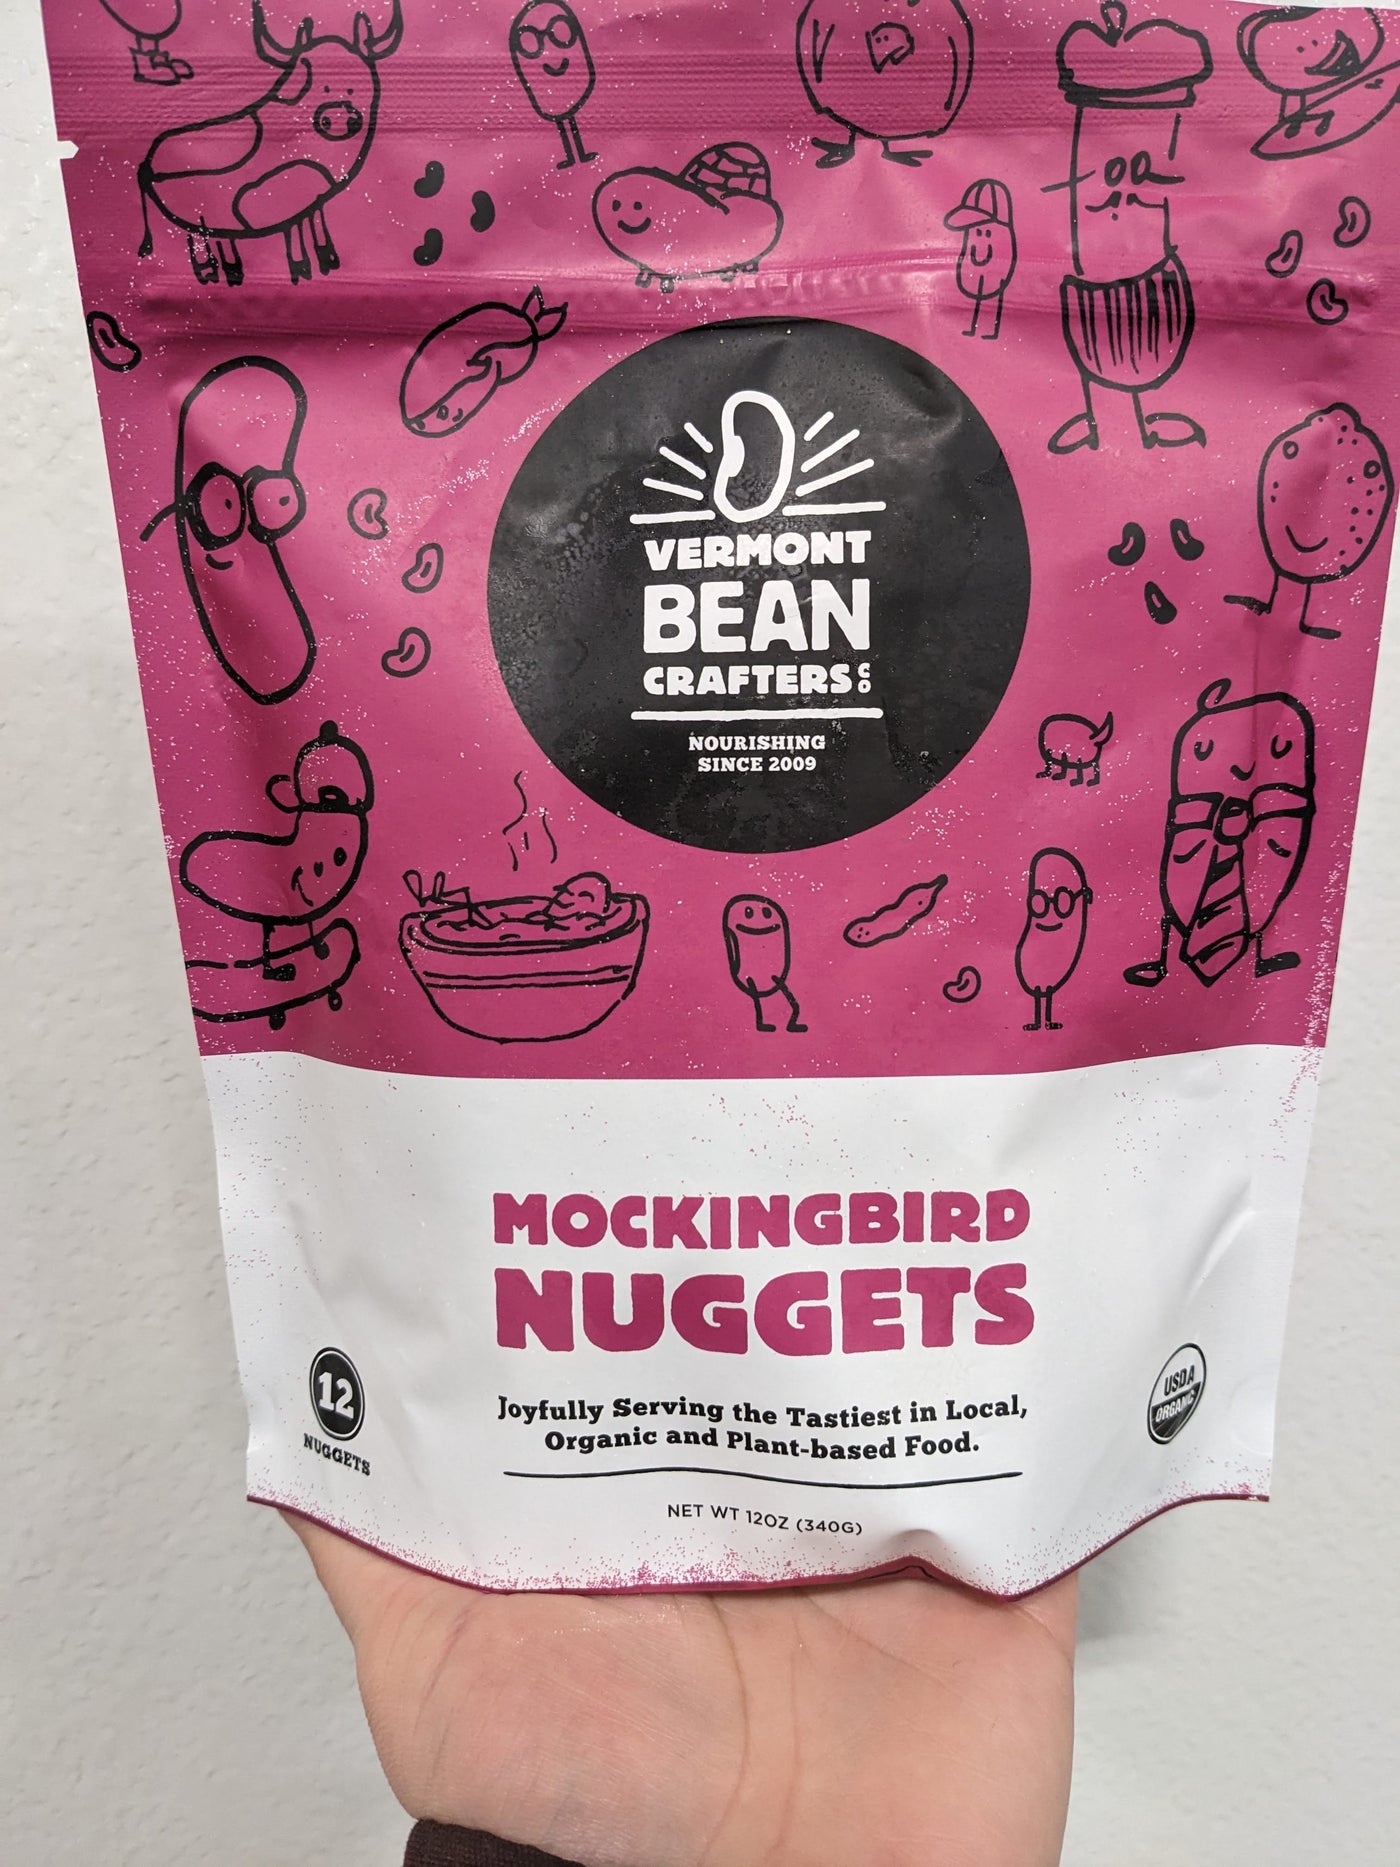 Mockingbird Nuggets - Vermont Bean Crafters